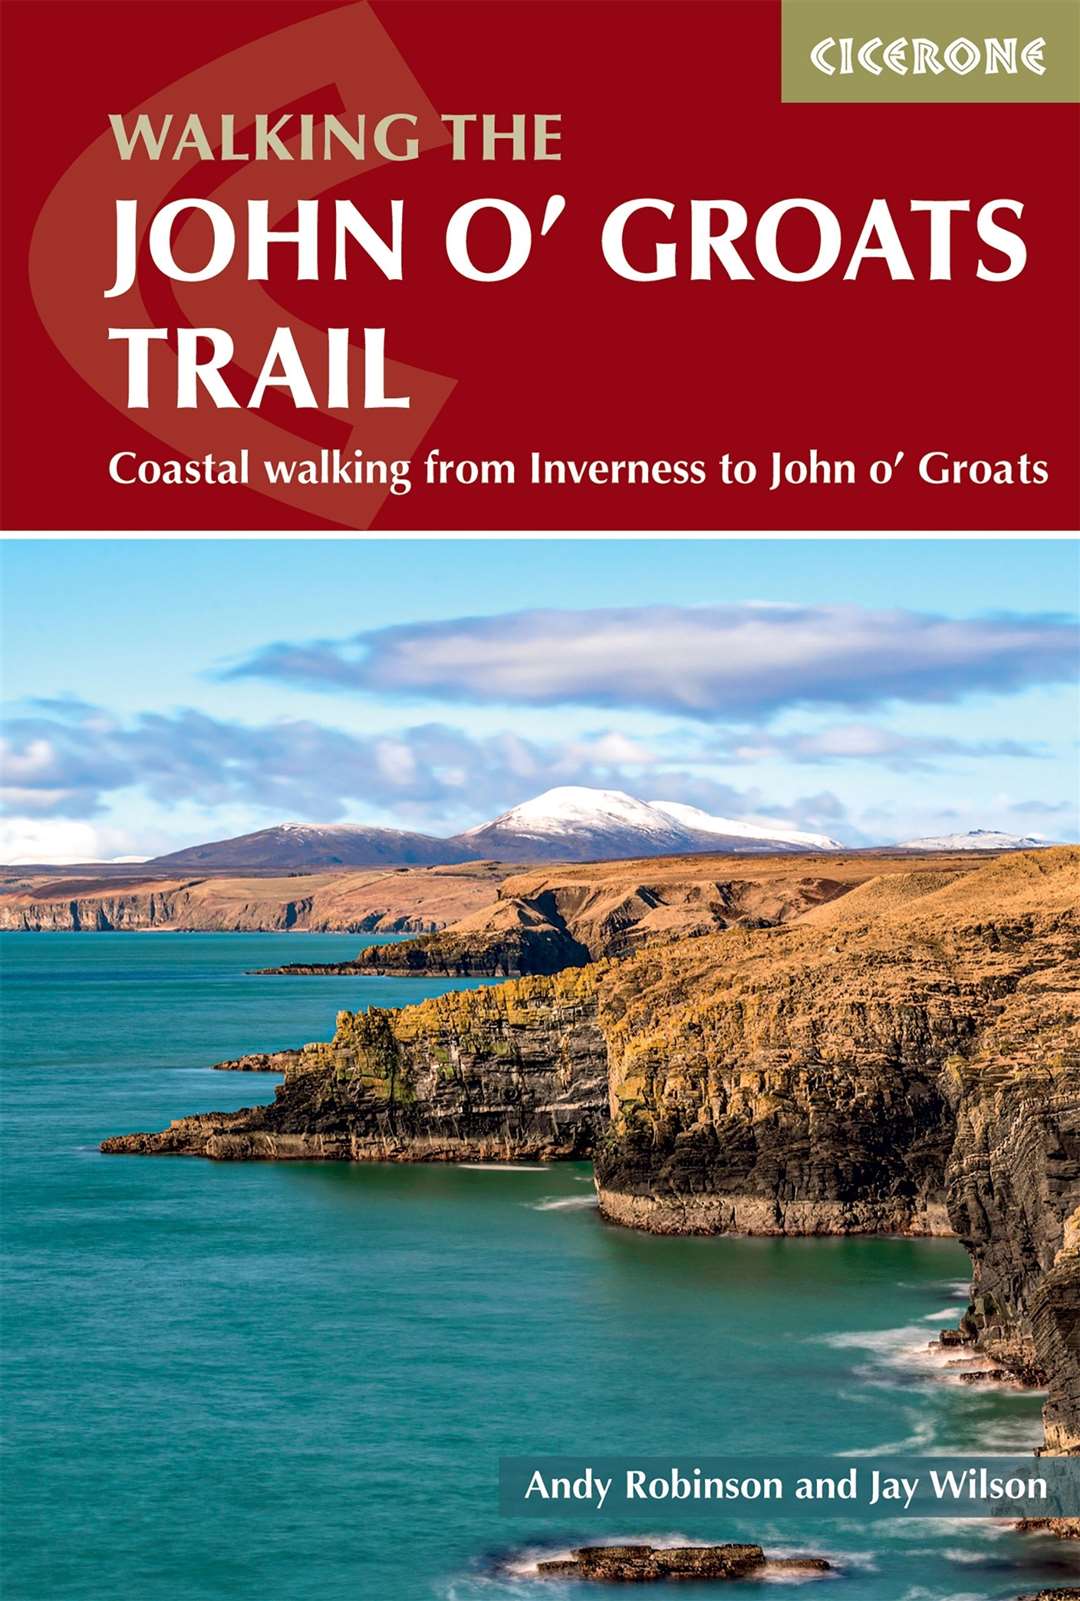 Cover of the Walking the John O'Groats Trail book.